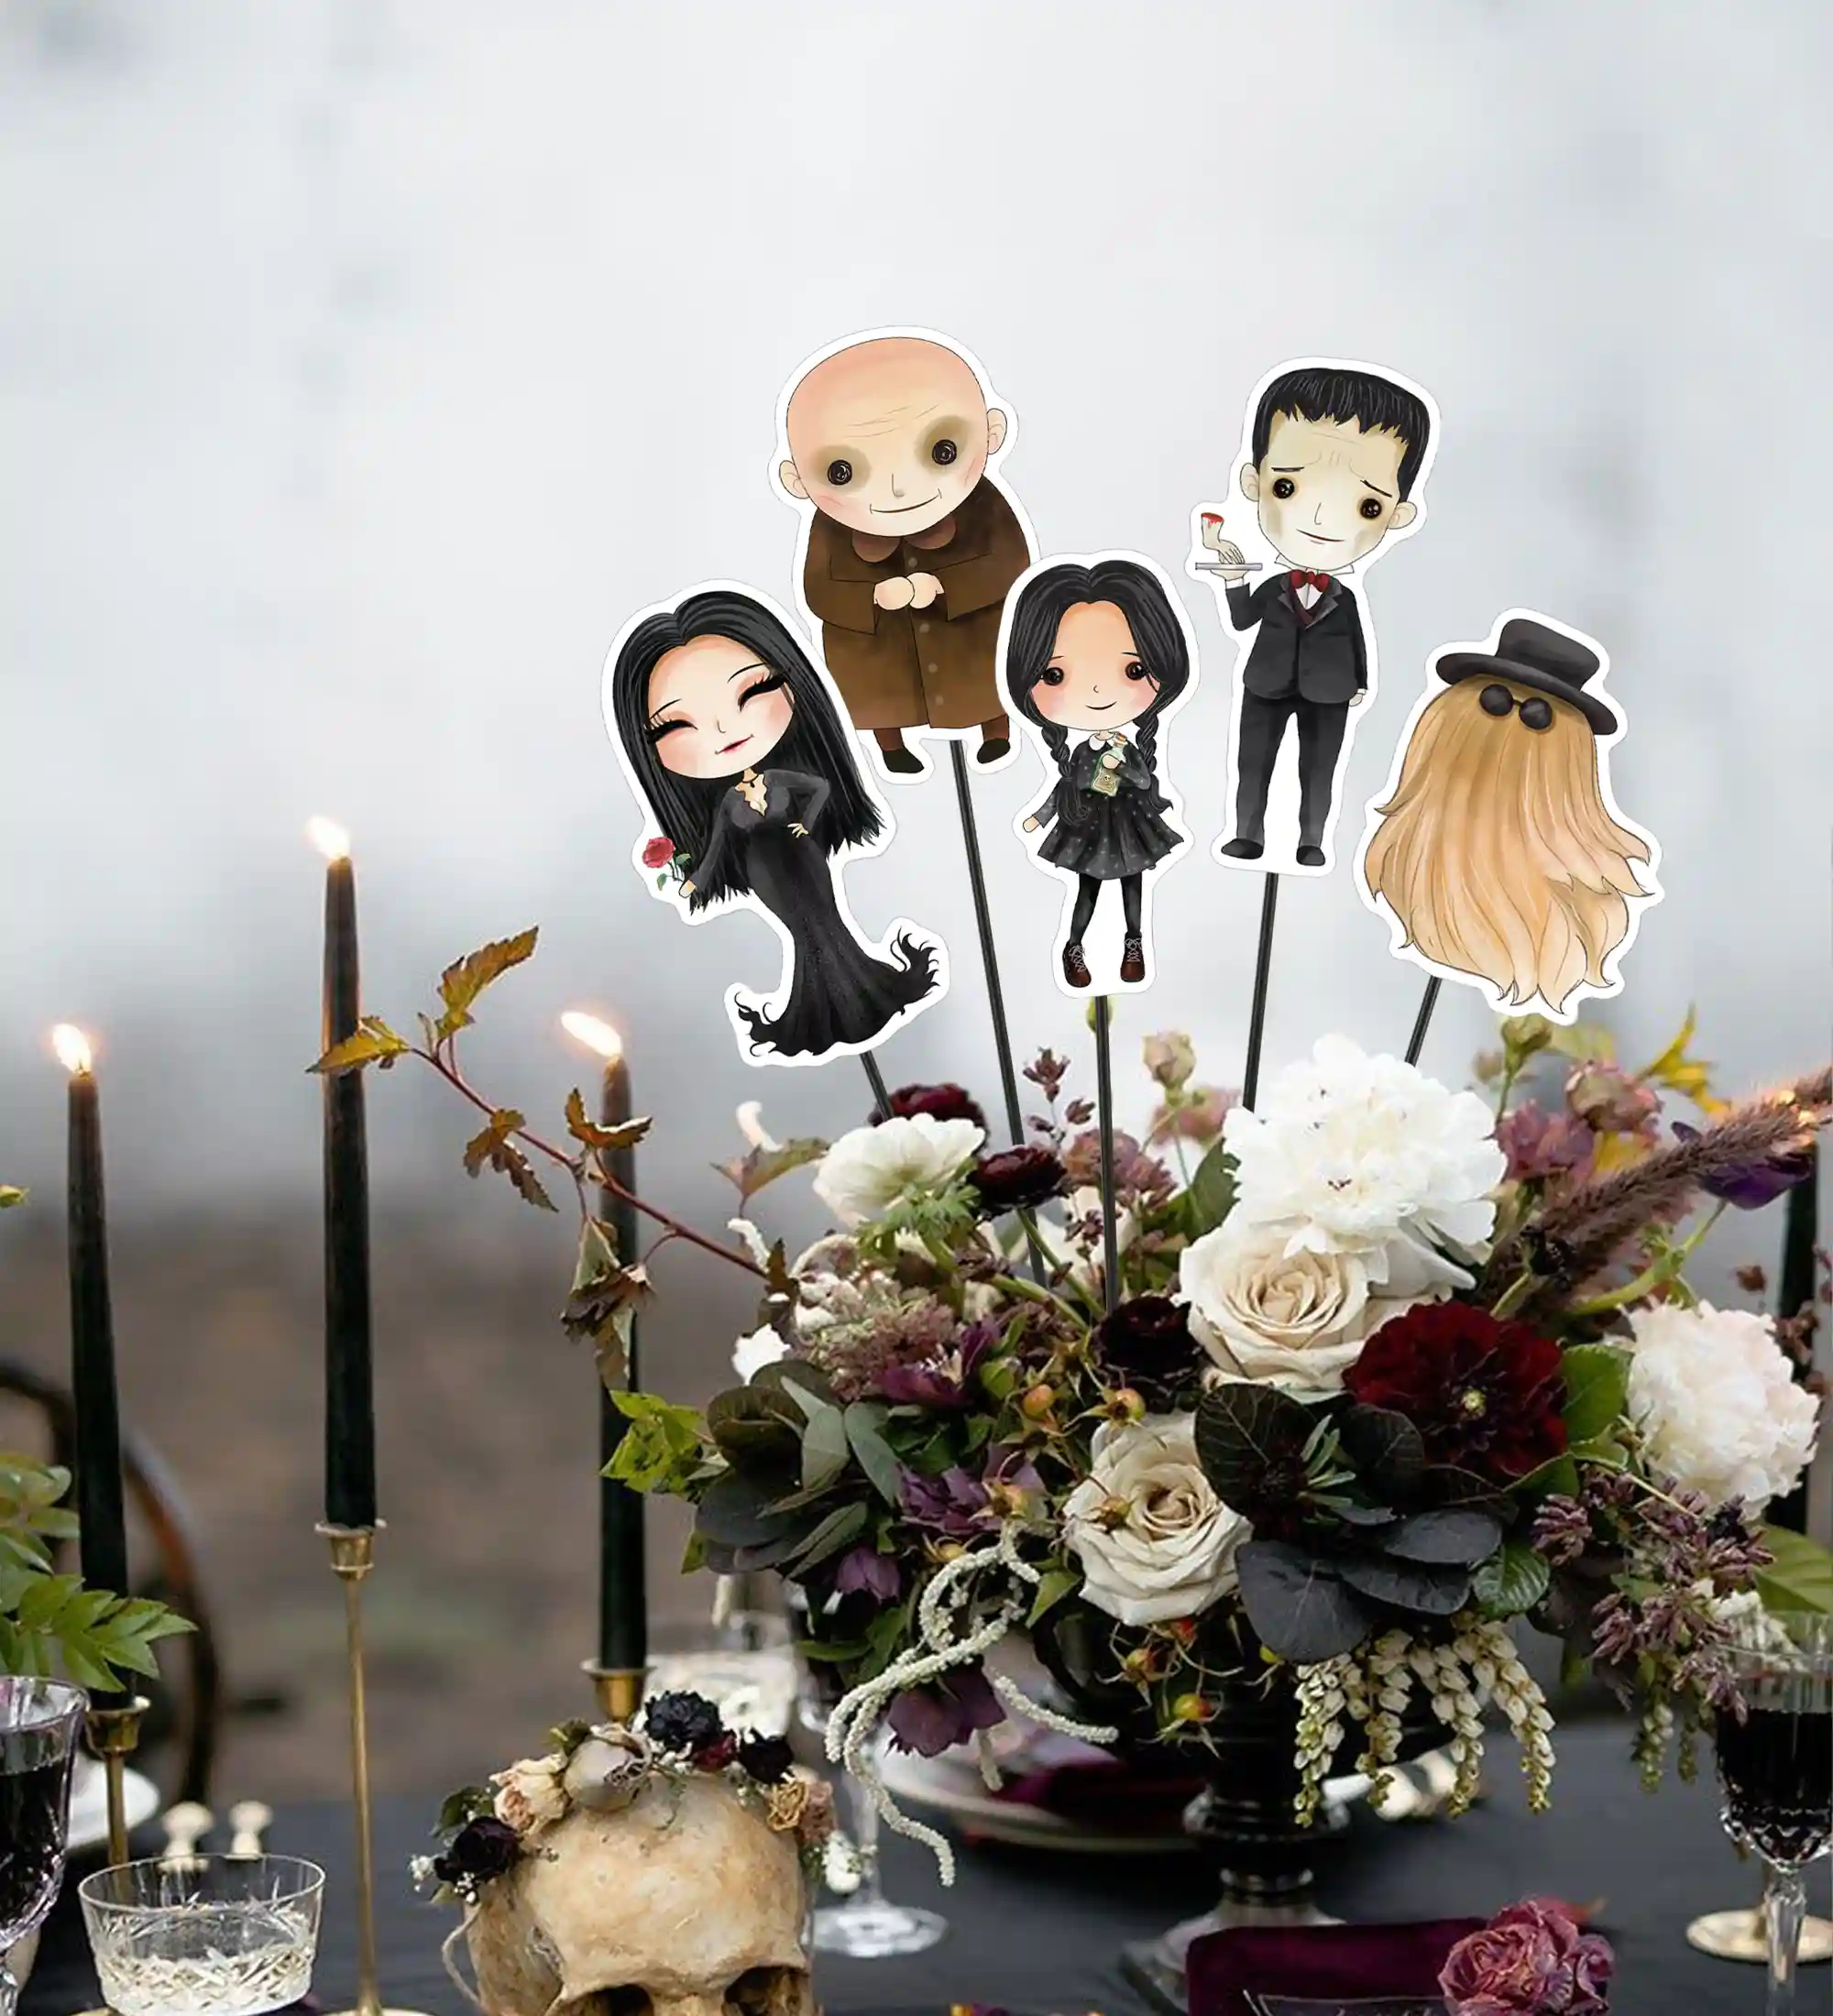 Addams family centerpiece ideas for you next celebrations. Download the printables for a Wednesday birthday party, Addams Family themed baby shower, or a Wednesday viewing party. Includes all the favorite characters Cousin Itt, Wednesday, Morticia, Gomez, Lurch, Uncle Fester, Pugsley, Thing, and more.